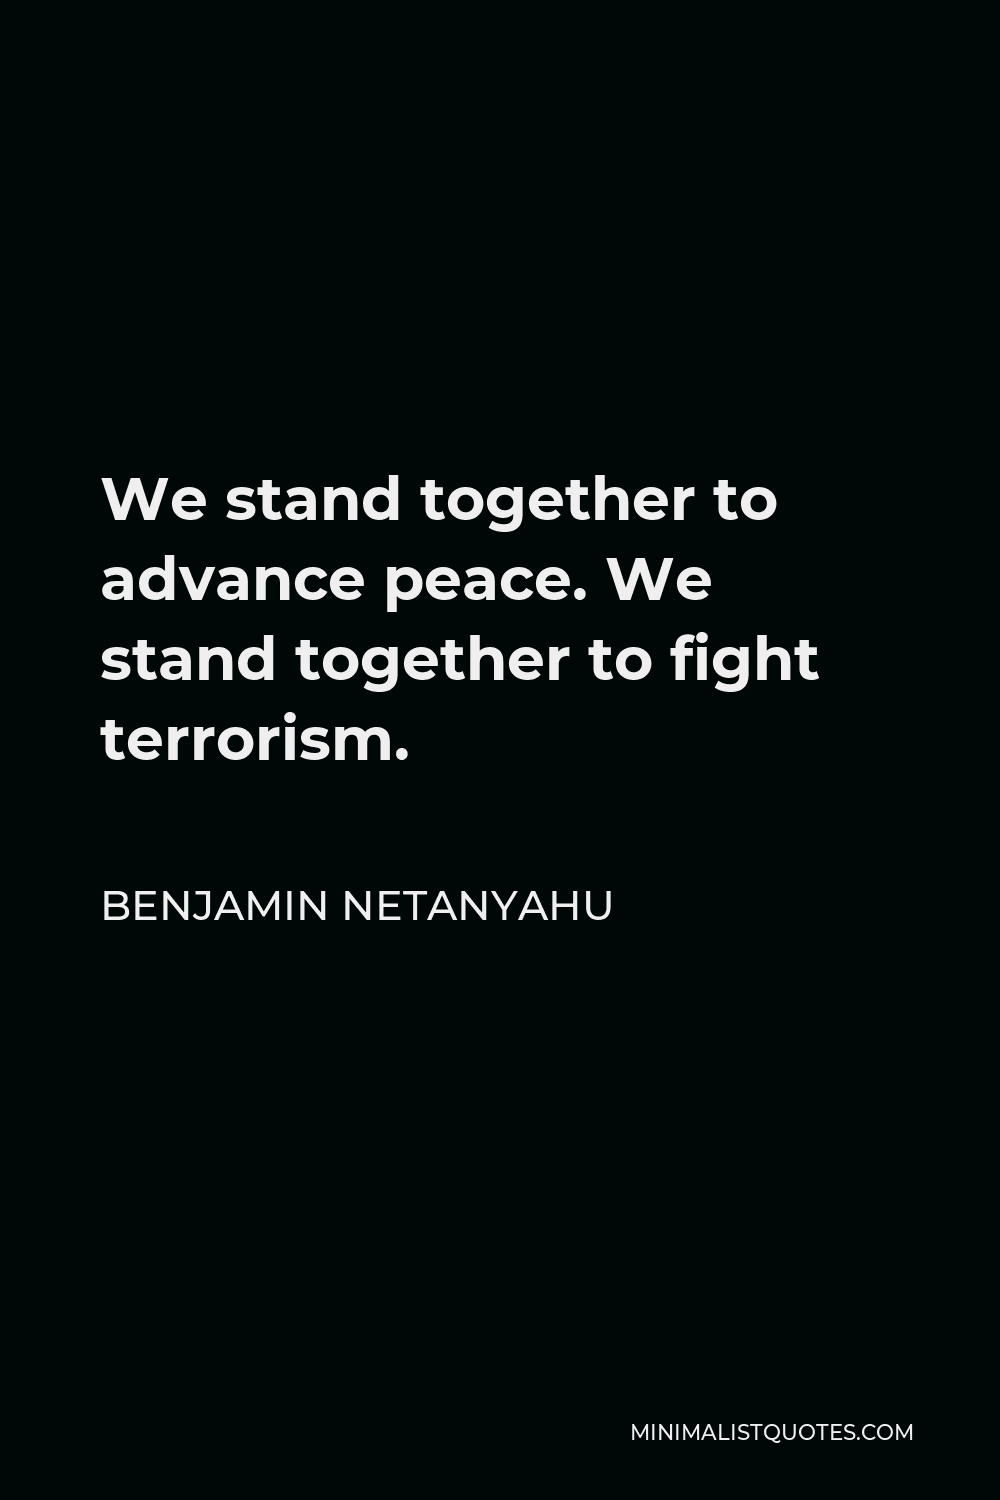 Benjamin Netanyahu Quote - We stand together to advance peace. We stand together to fight terrorism.